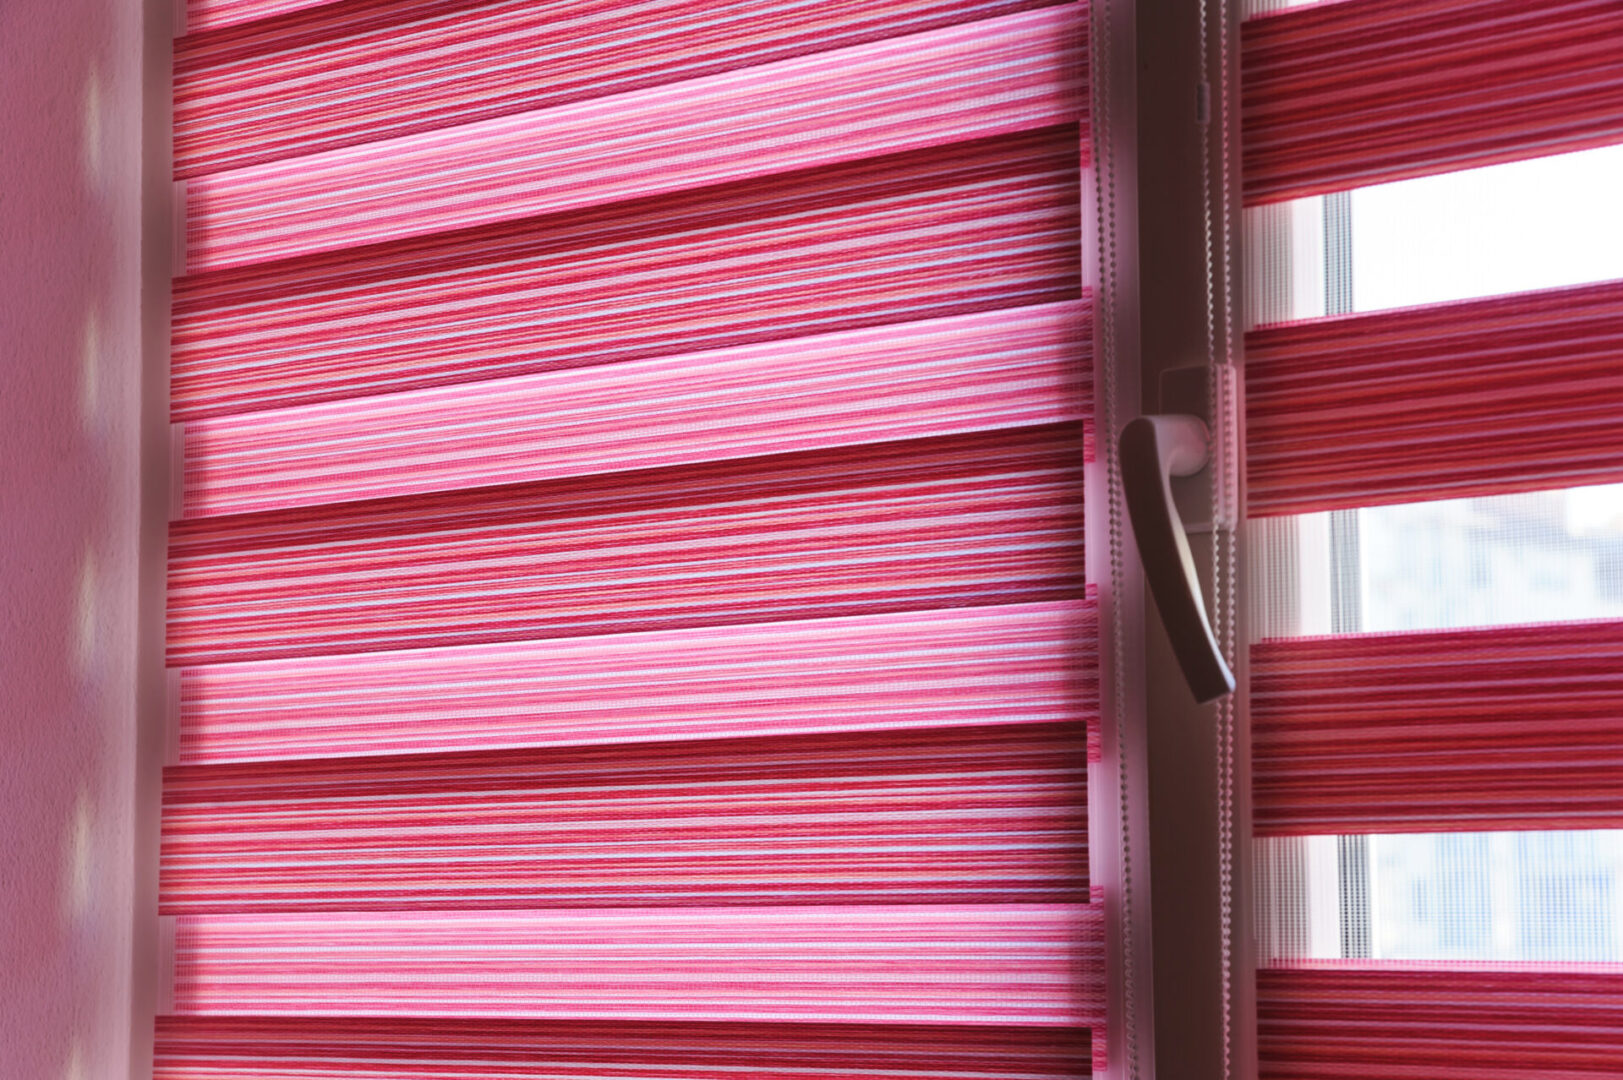 A Pink and White Color Shade Blinds for a Window